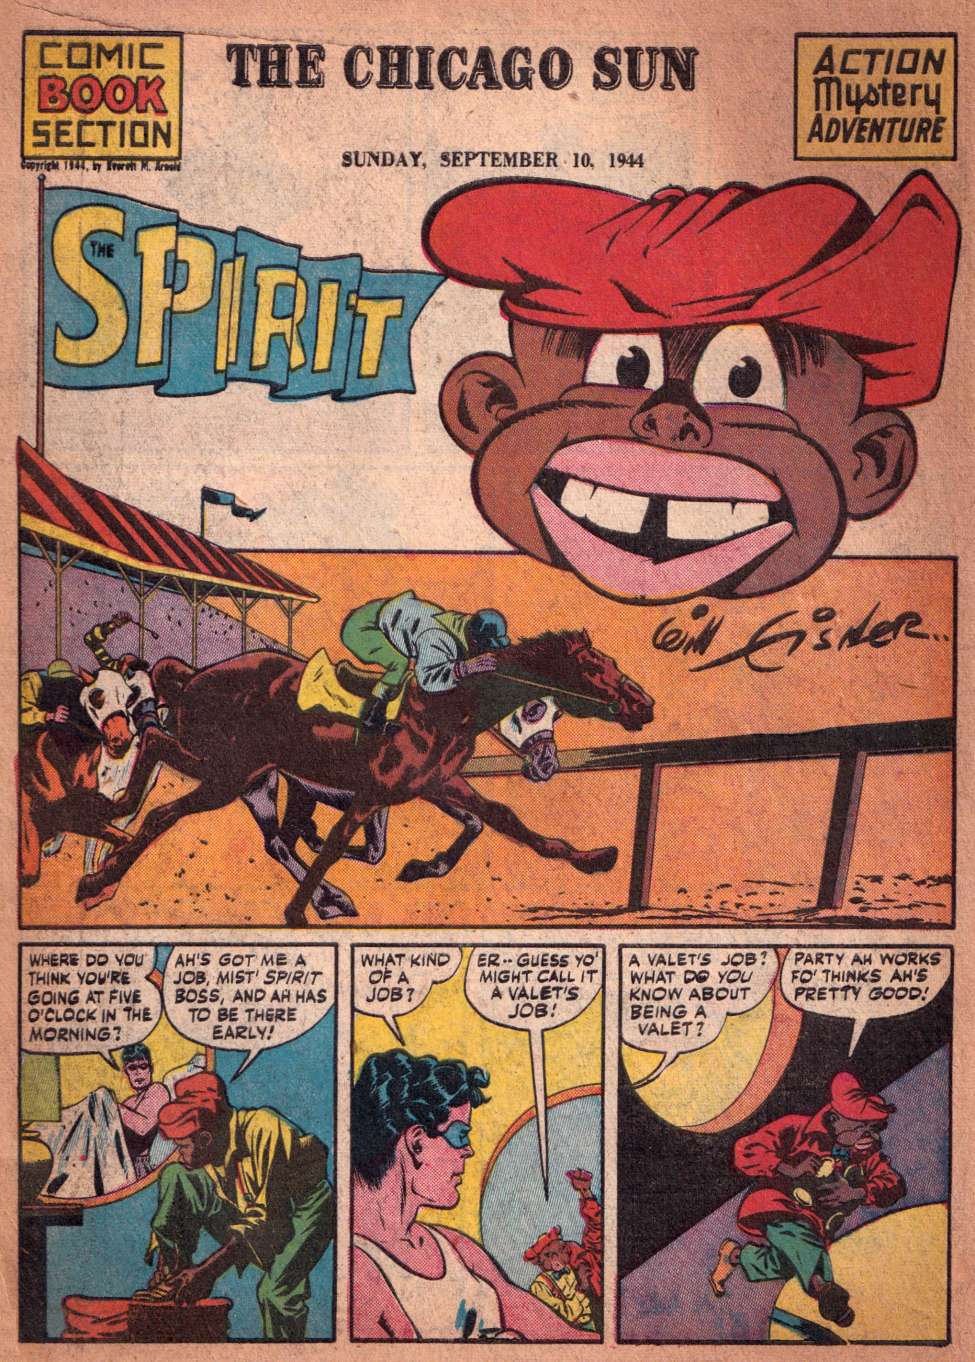 Comic Book Cover For The Spirit (1944-09-10) - Chicago Sun